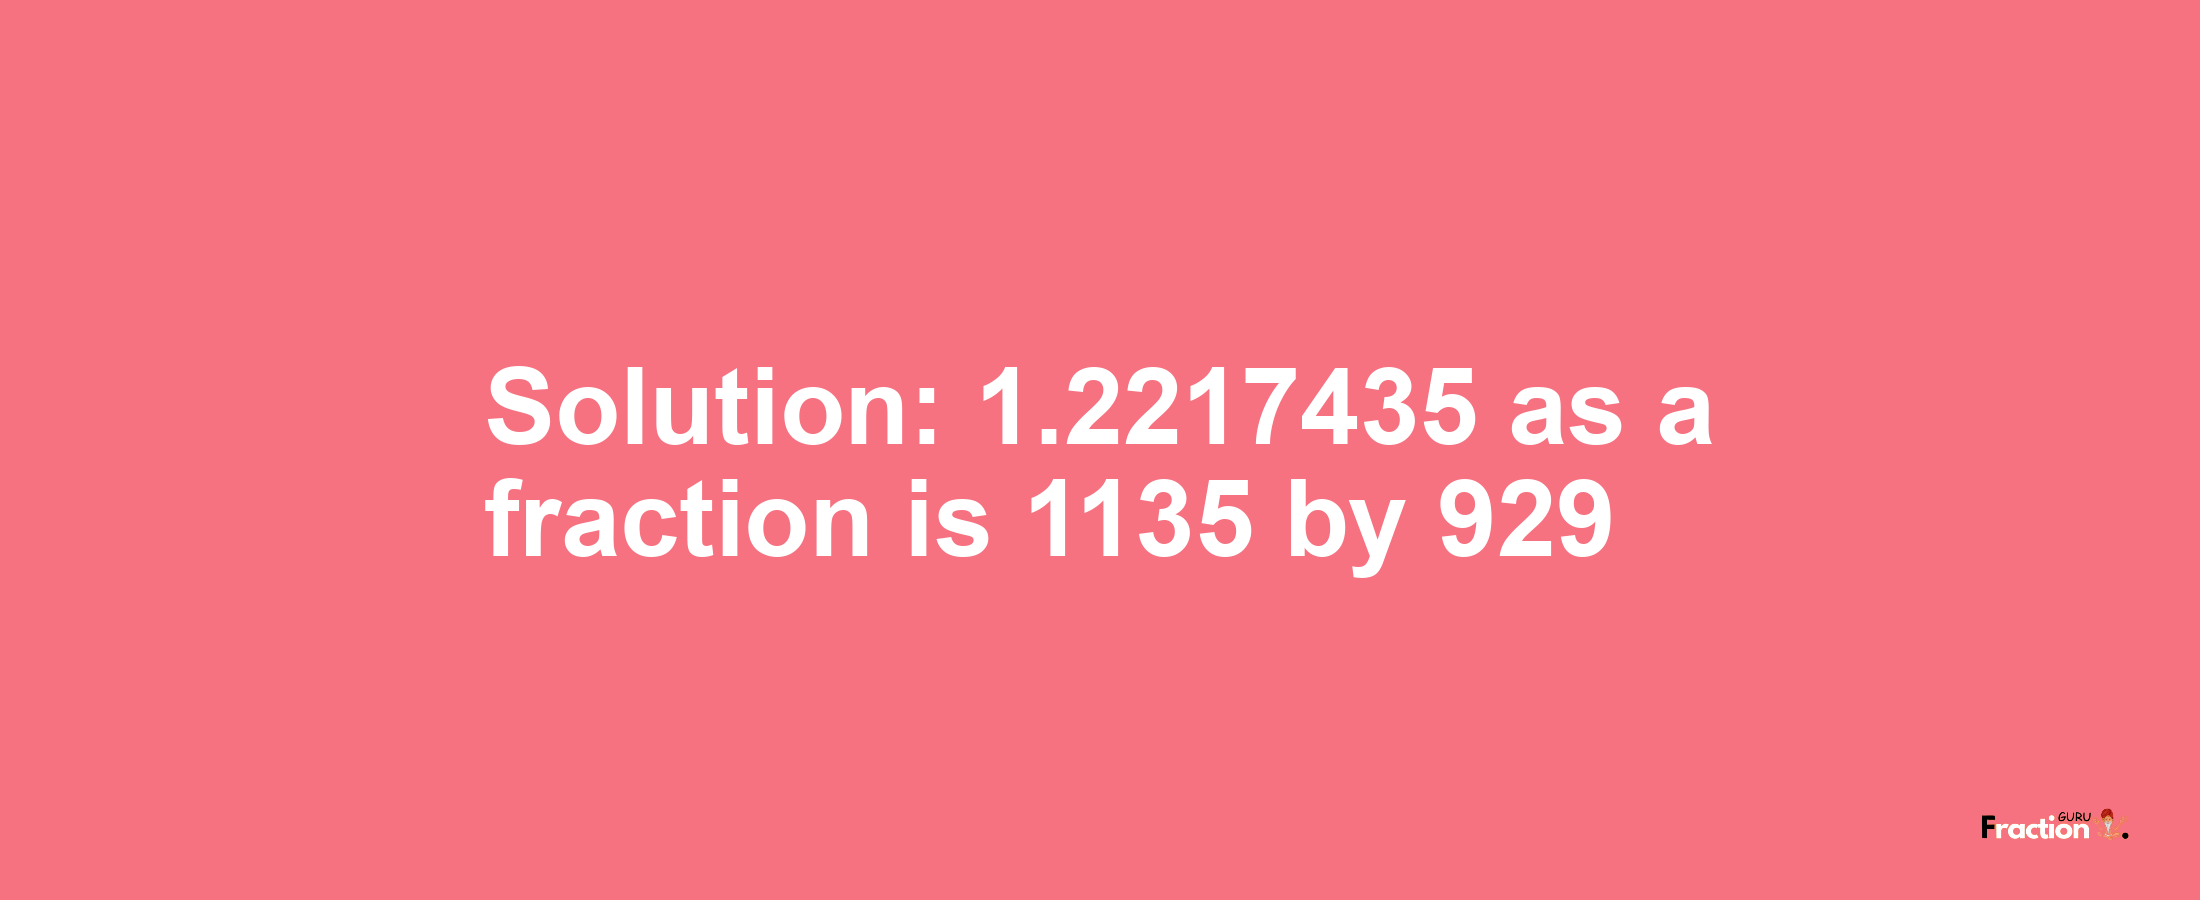 Solution:1.2217435 as a fraction is 1135/929